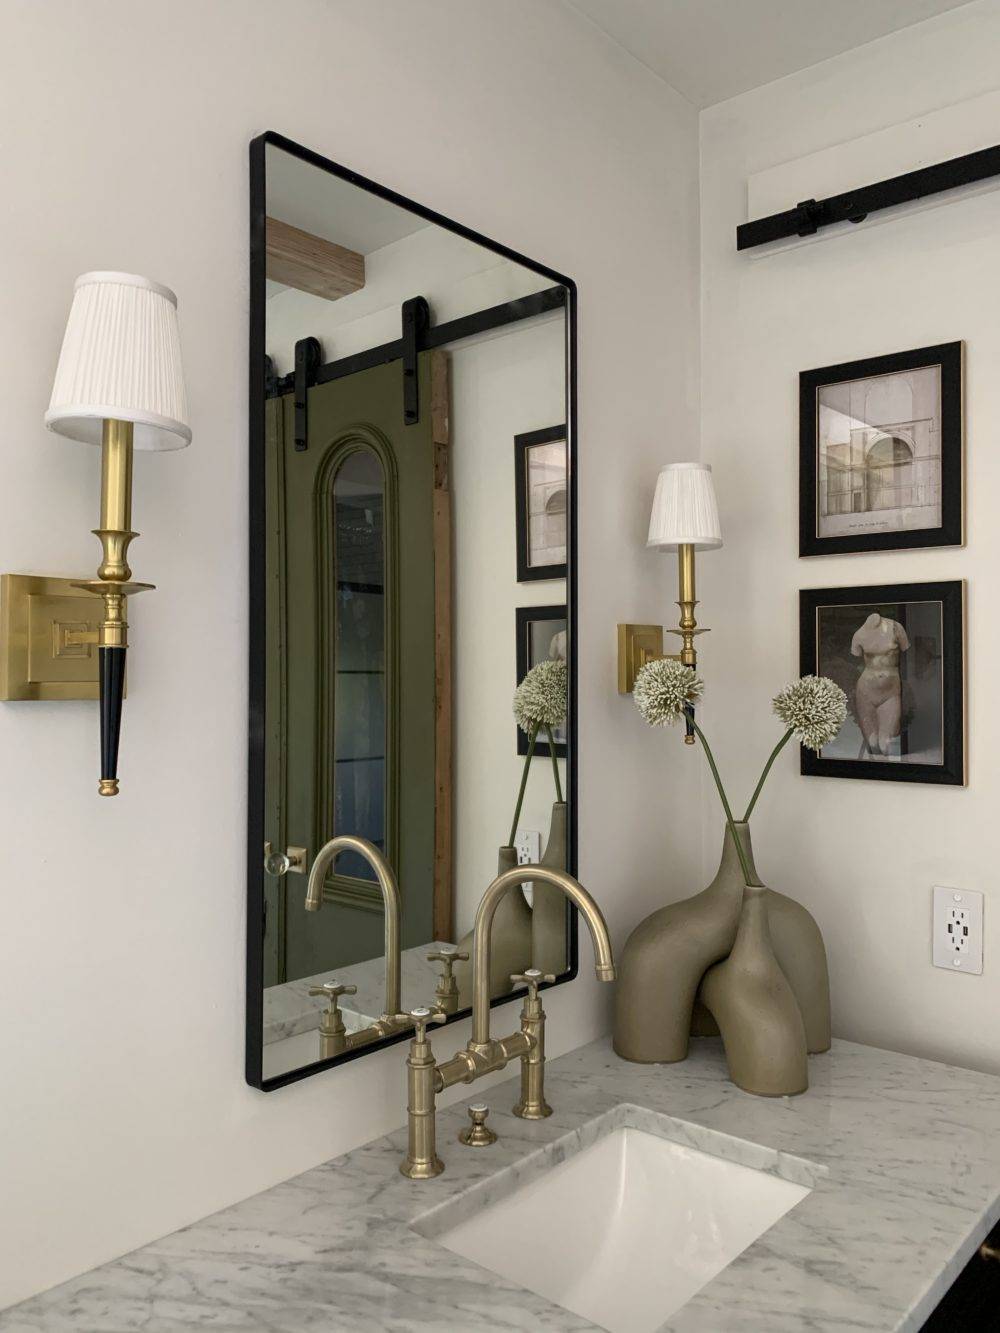 Detail shot of marble bathroom sink and black mirror with gold wall sconces